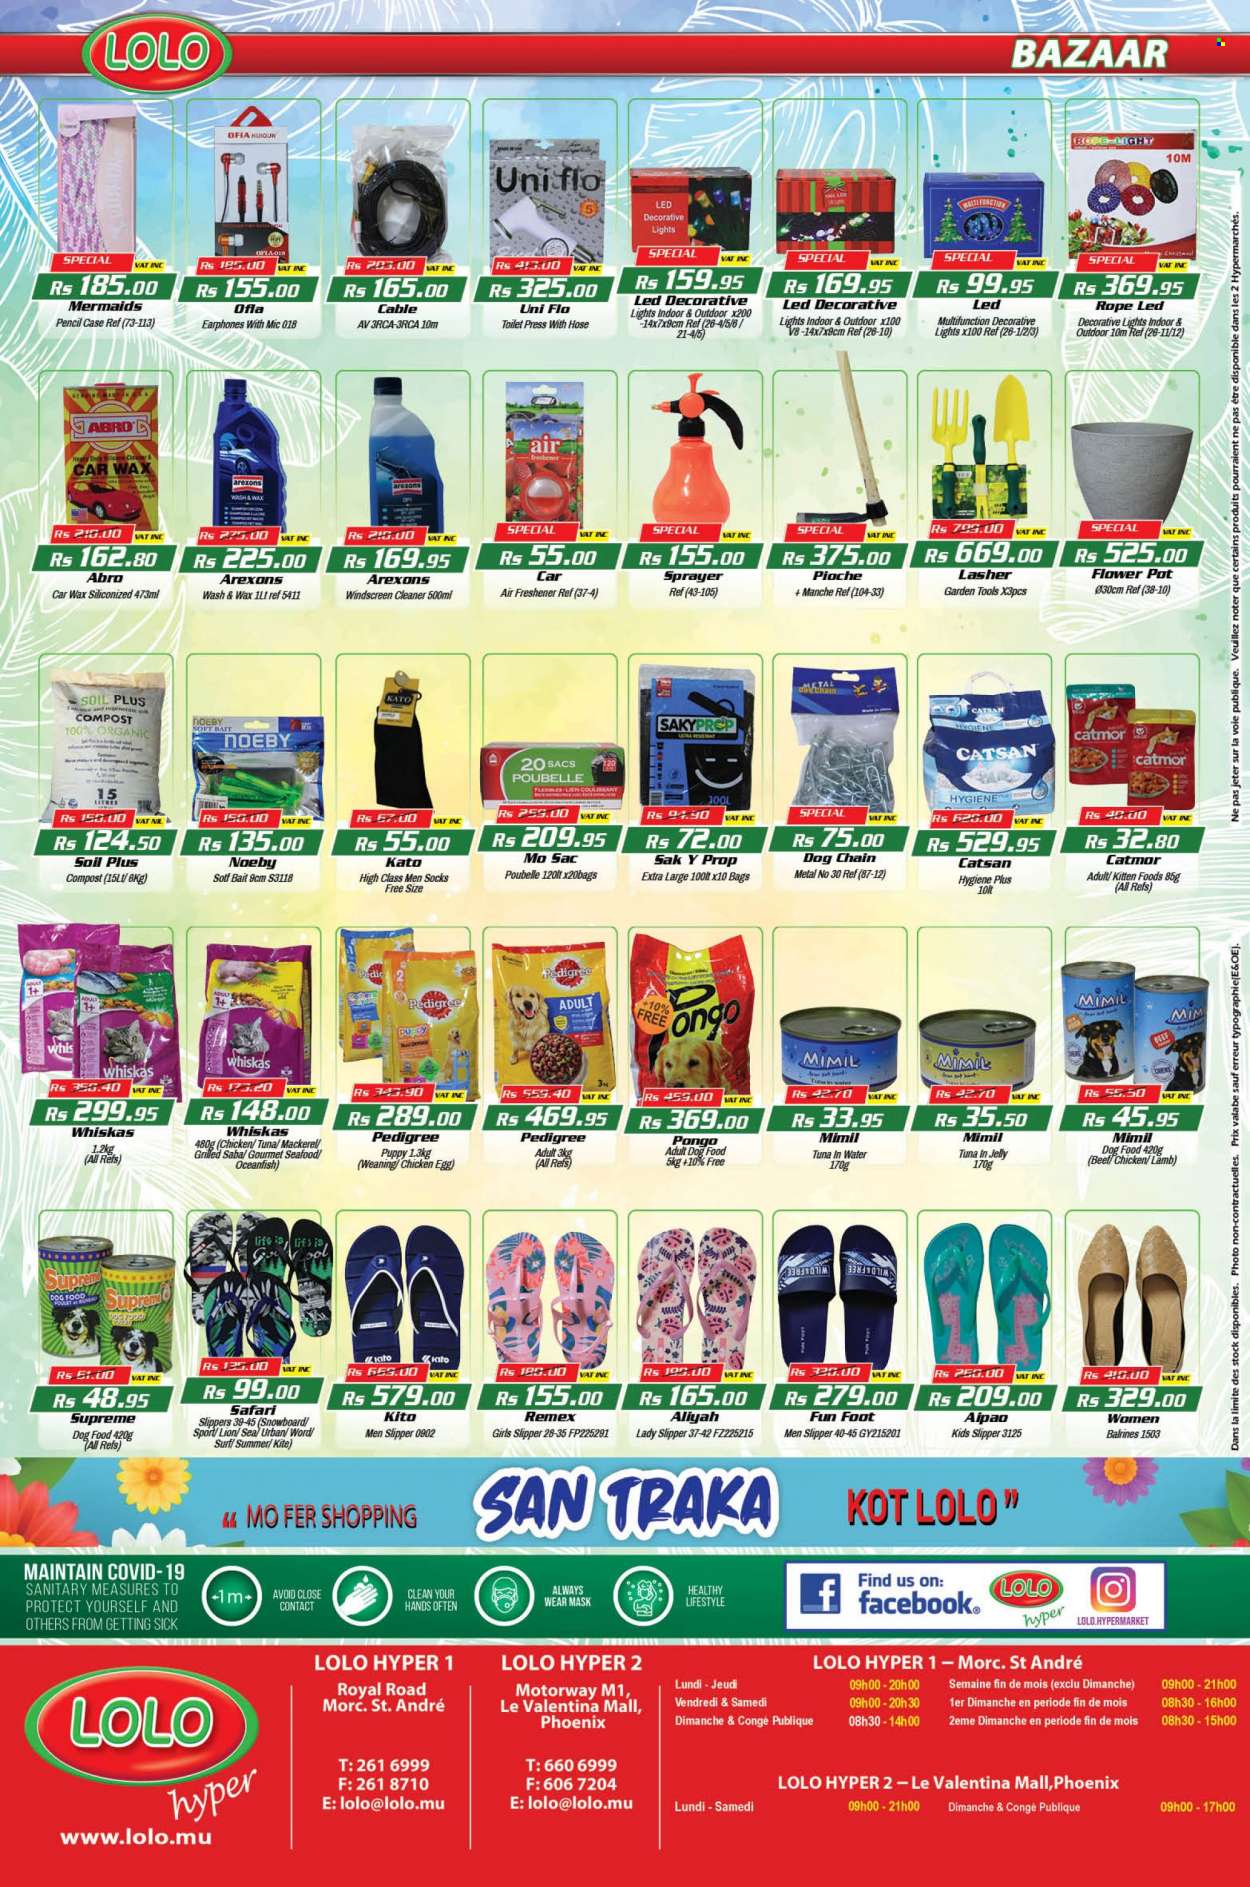 thumbnail - LOLO Hyper Catalogue - 26.09.2022 - 17.10.2022 - Sales products - mackerel, seafood, eggs, tuna in water, cleaner, Surf, Brite, bag, pot, pencil, air freshener, animal food, dog food, Pedigree, socks, slippers, gardening tools, sprayer, compost, Whiskas. Page 24.